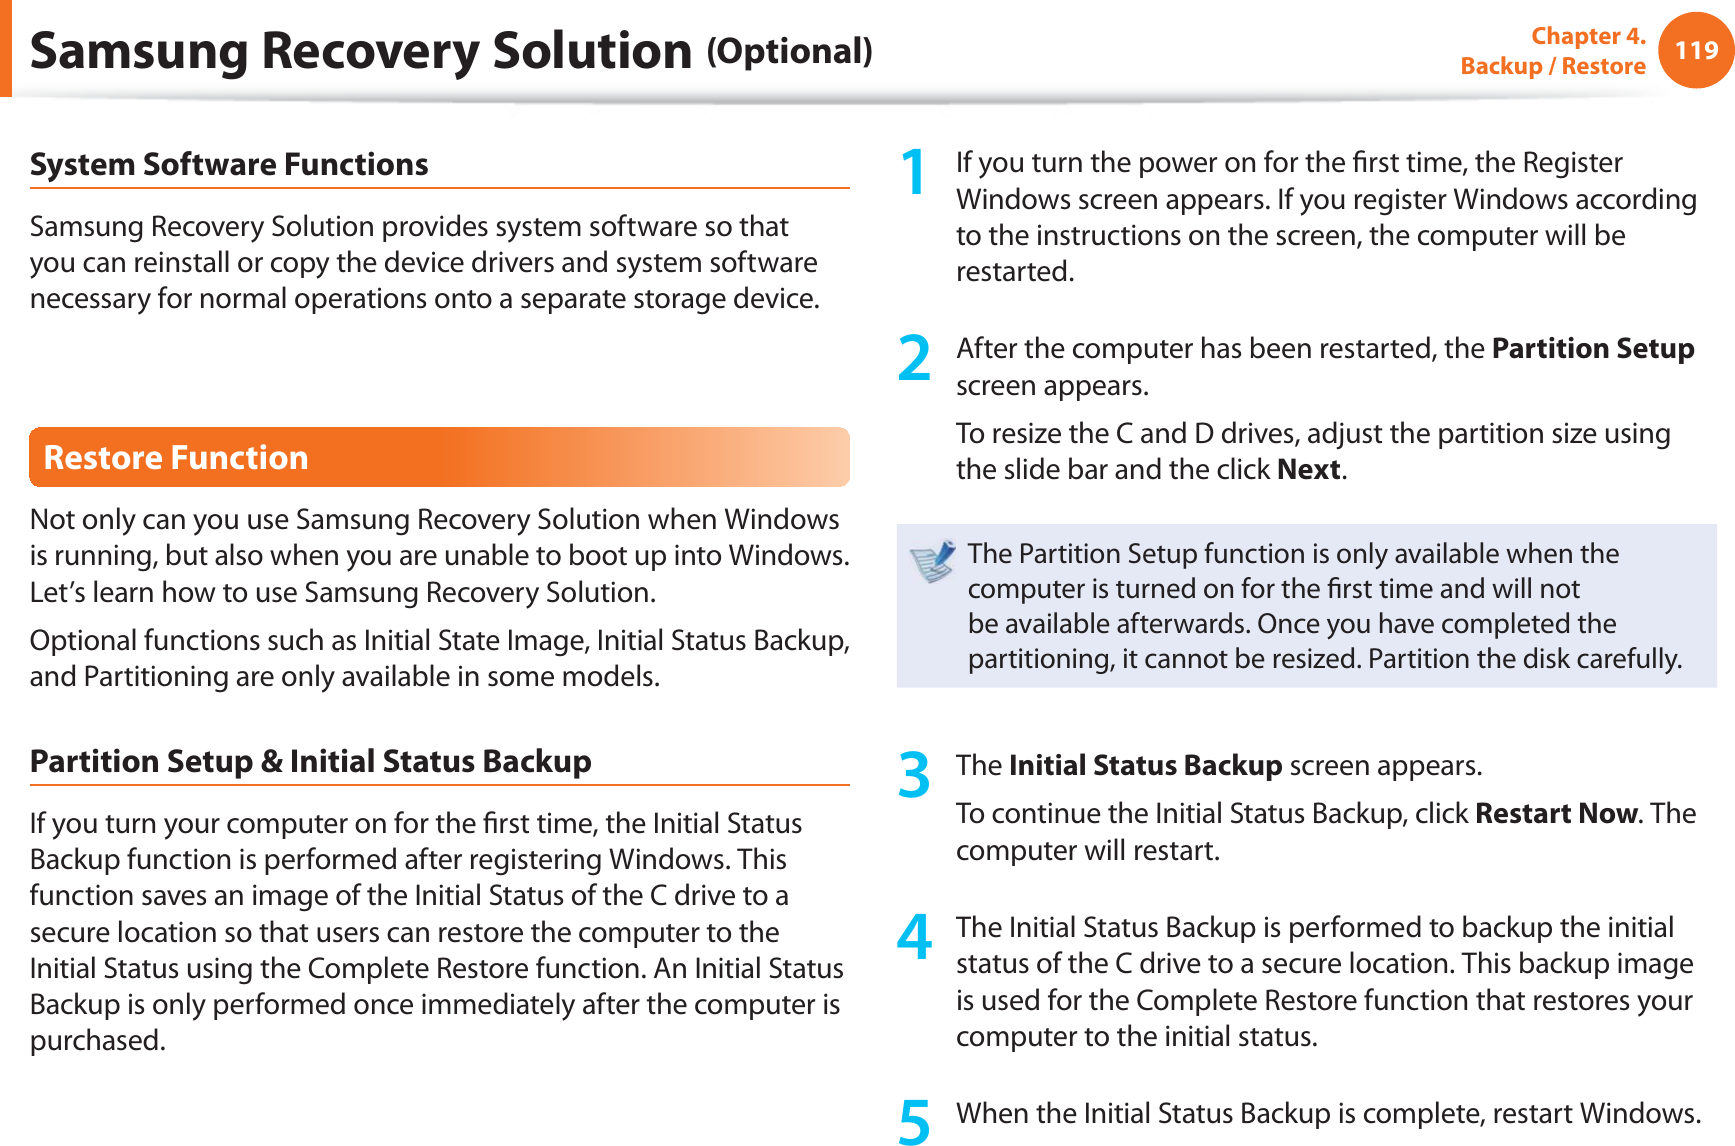 119Chapter 4.  Backup / RestoreSystem Software FunctionsSamsung Recovery Solution provides system software so that you can reinstall or copy the device drivers and system software necessary for normal operations onto a separate storage device.Restore FunctionNot only can you use Samsung Recovery Solution when Windows is running, but also when you are unable to boot up into Windows. Let’s learn how to use Samsung Recovery Solution.Optional functions such as Initial State Image, Initial Status Backup, and Partitioning are only available in some models.Partition Setup &amp; Initial Status BackupIf you turn your computer on for the ﬁ rst time, the Initial Status Backup function is performed after registering Windows. This function saves an image of the Initial Status of the C drive to a secure location so that users can restore the computer to the Initial Status using the Complete Restore function. An Initial Status Backup is only performed once immediately after the computer is purchased.1  If you turn the power on for the ﬁ rst time, the Register Windows screen appears. If you register Windows according to the instructions on the screen, the computer will be restarted.2  After the computer has been restarted, the Partition Setup screen appears. To resize the C and D drives, adjust the partition size using the slide bar and the click Next.The Partition Setup function is only available when the computer is turned on for the ﬁ rst time and will not be available afterwards. Once you have completed the partitioning, it cannot be resized. Partition the disk carefully.3 The Initial Status Backup screen appears. To continue the Initial Status Backup, click Restart Now. The computer will restart.4  The Initial Status Backup is performed to backup the initial status of the C drive to a secure location. This backup image is used for the Complete Restore function that restores your computer to the initial status.5  When the Initial Status Backup is complete, restart Windows.Samsung Recovery Solution (Optional)